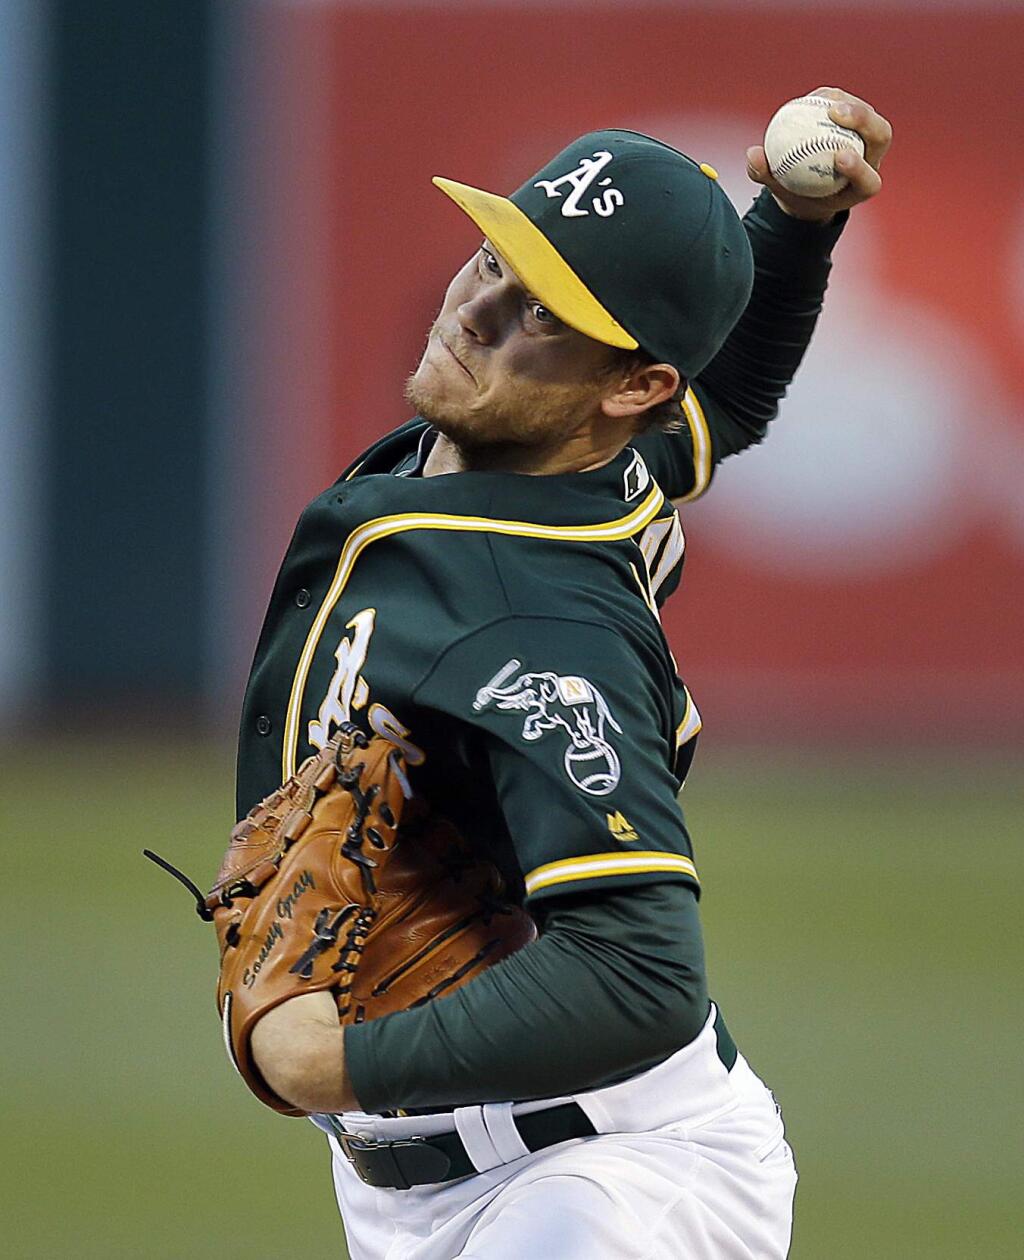 Oakland Athletics pitcher Sonny Gray works against the Tampa Bay Rays in the first inning of a baseball game Thursday, July 21, 2016, in Oakland, Calif. (AP Photo/Ben Margot)